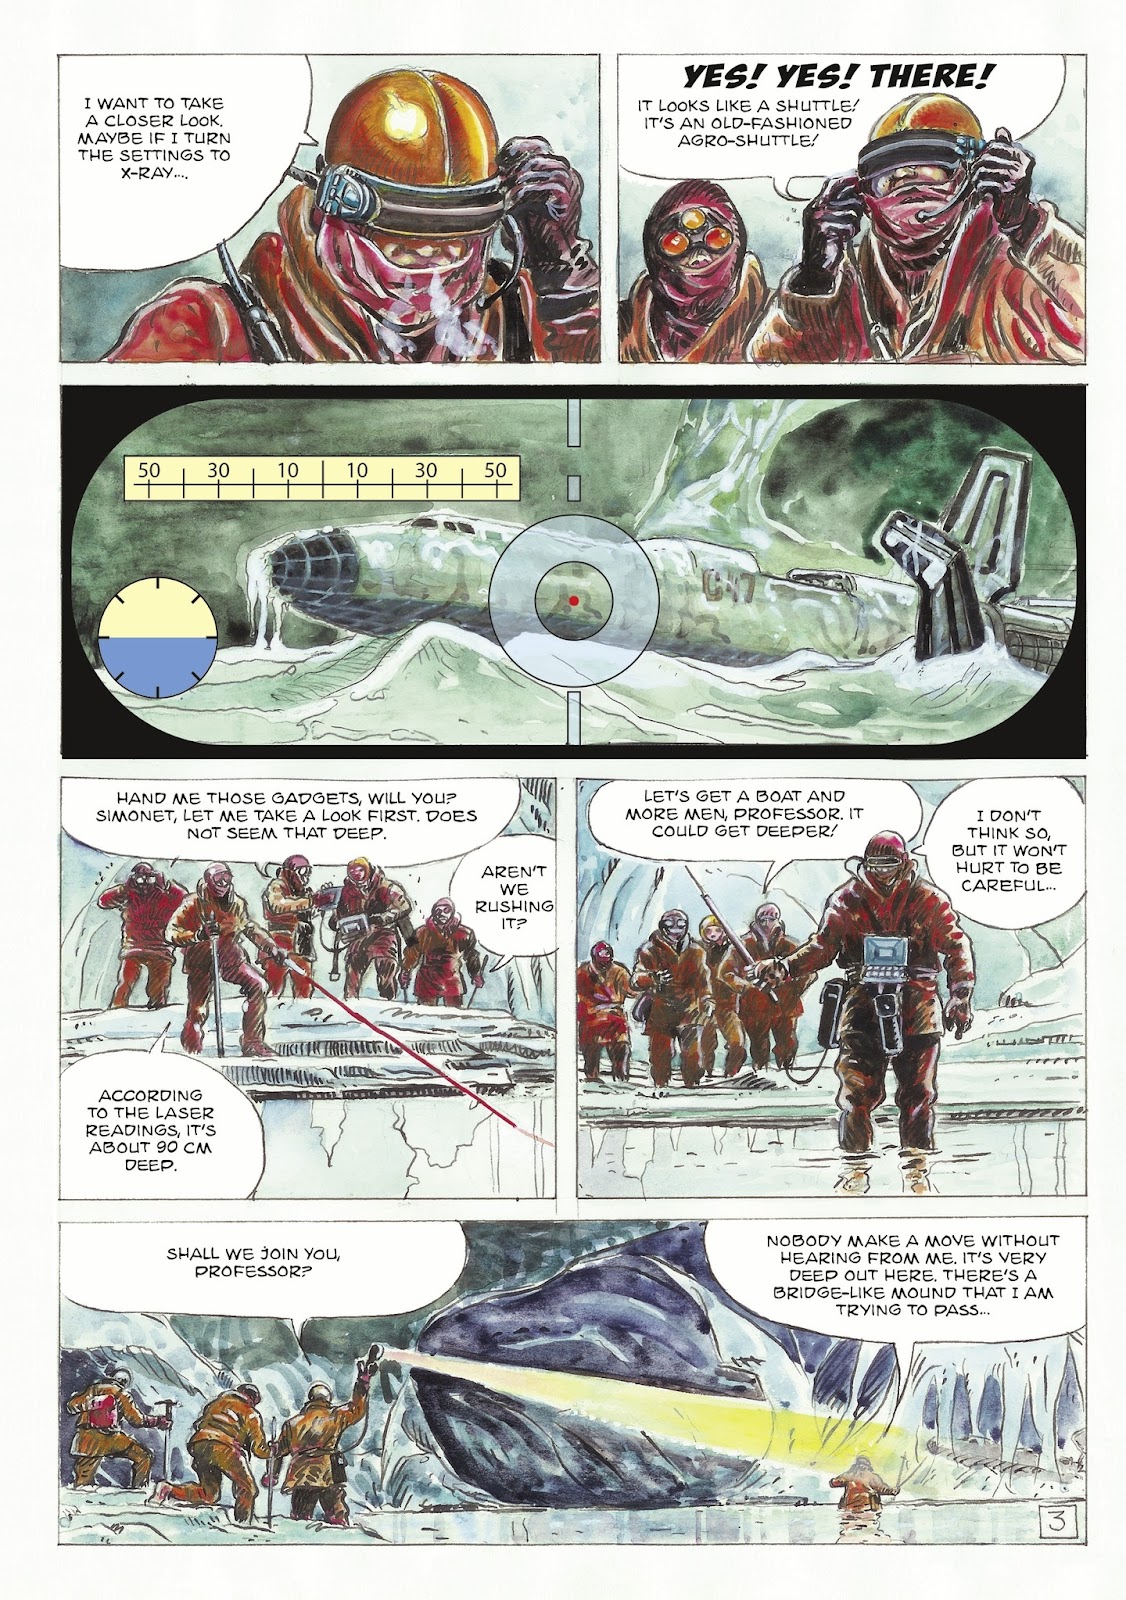 The Man With the Bear issue 1 - Page 5